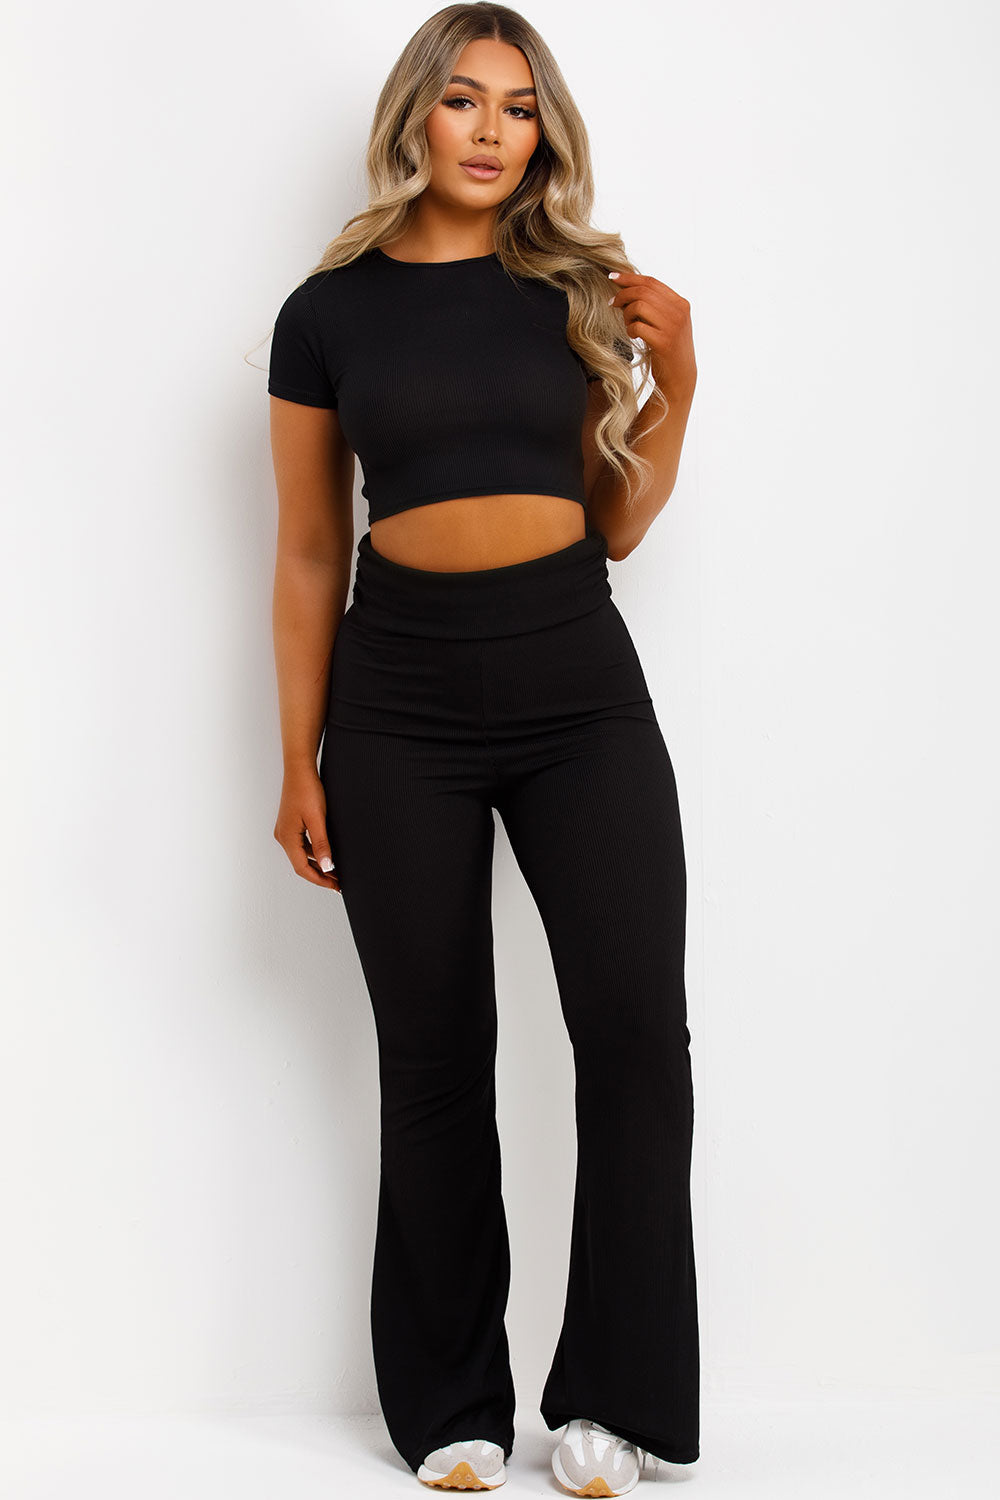 fold over trousers flared trousers and crop top two piece set casual summer outfit